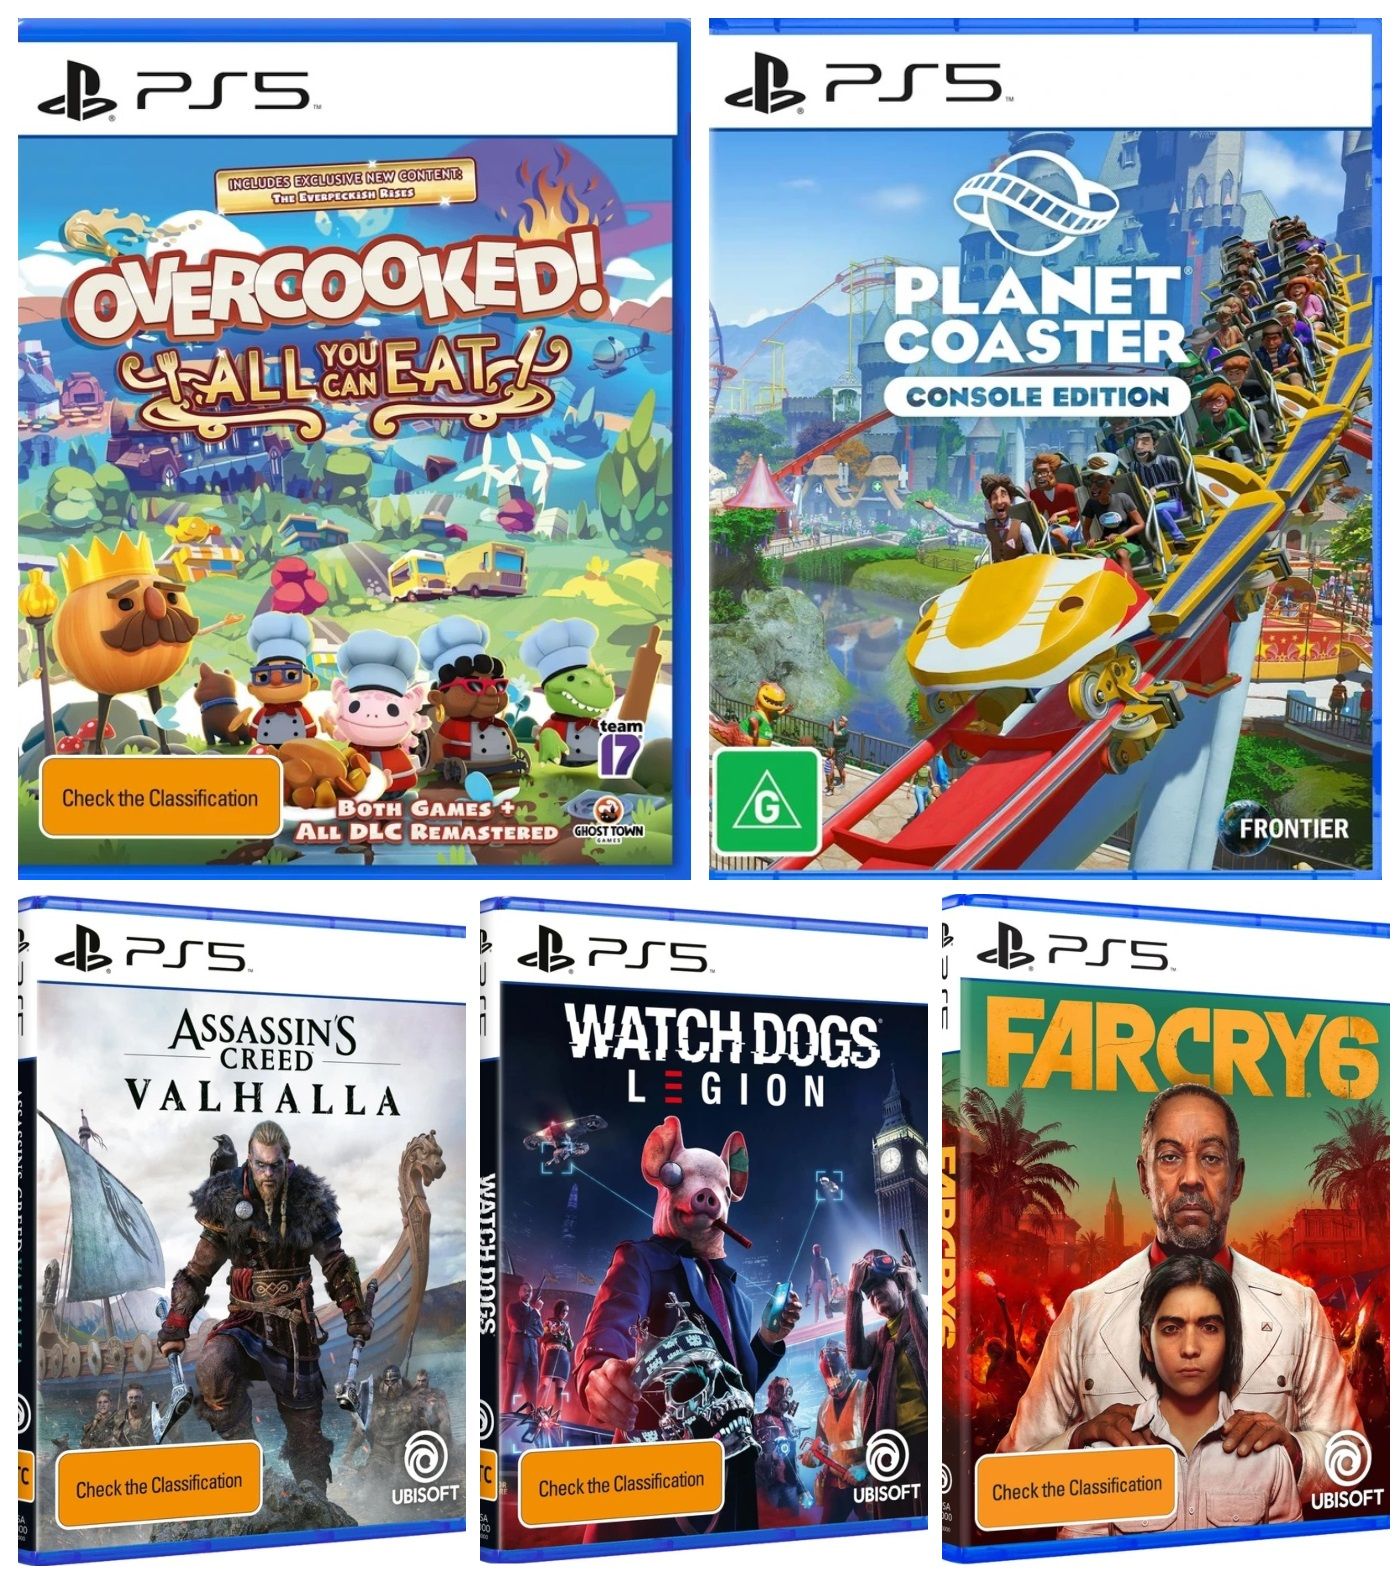 Box art for the PS5 games that have been leaked.